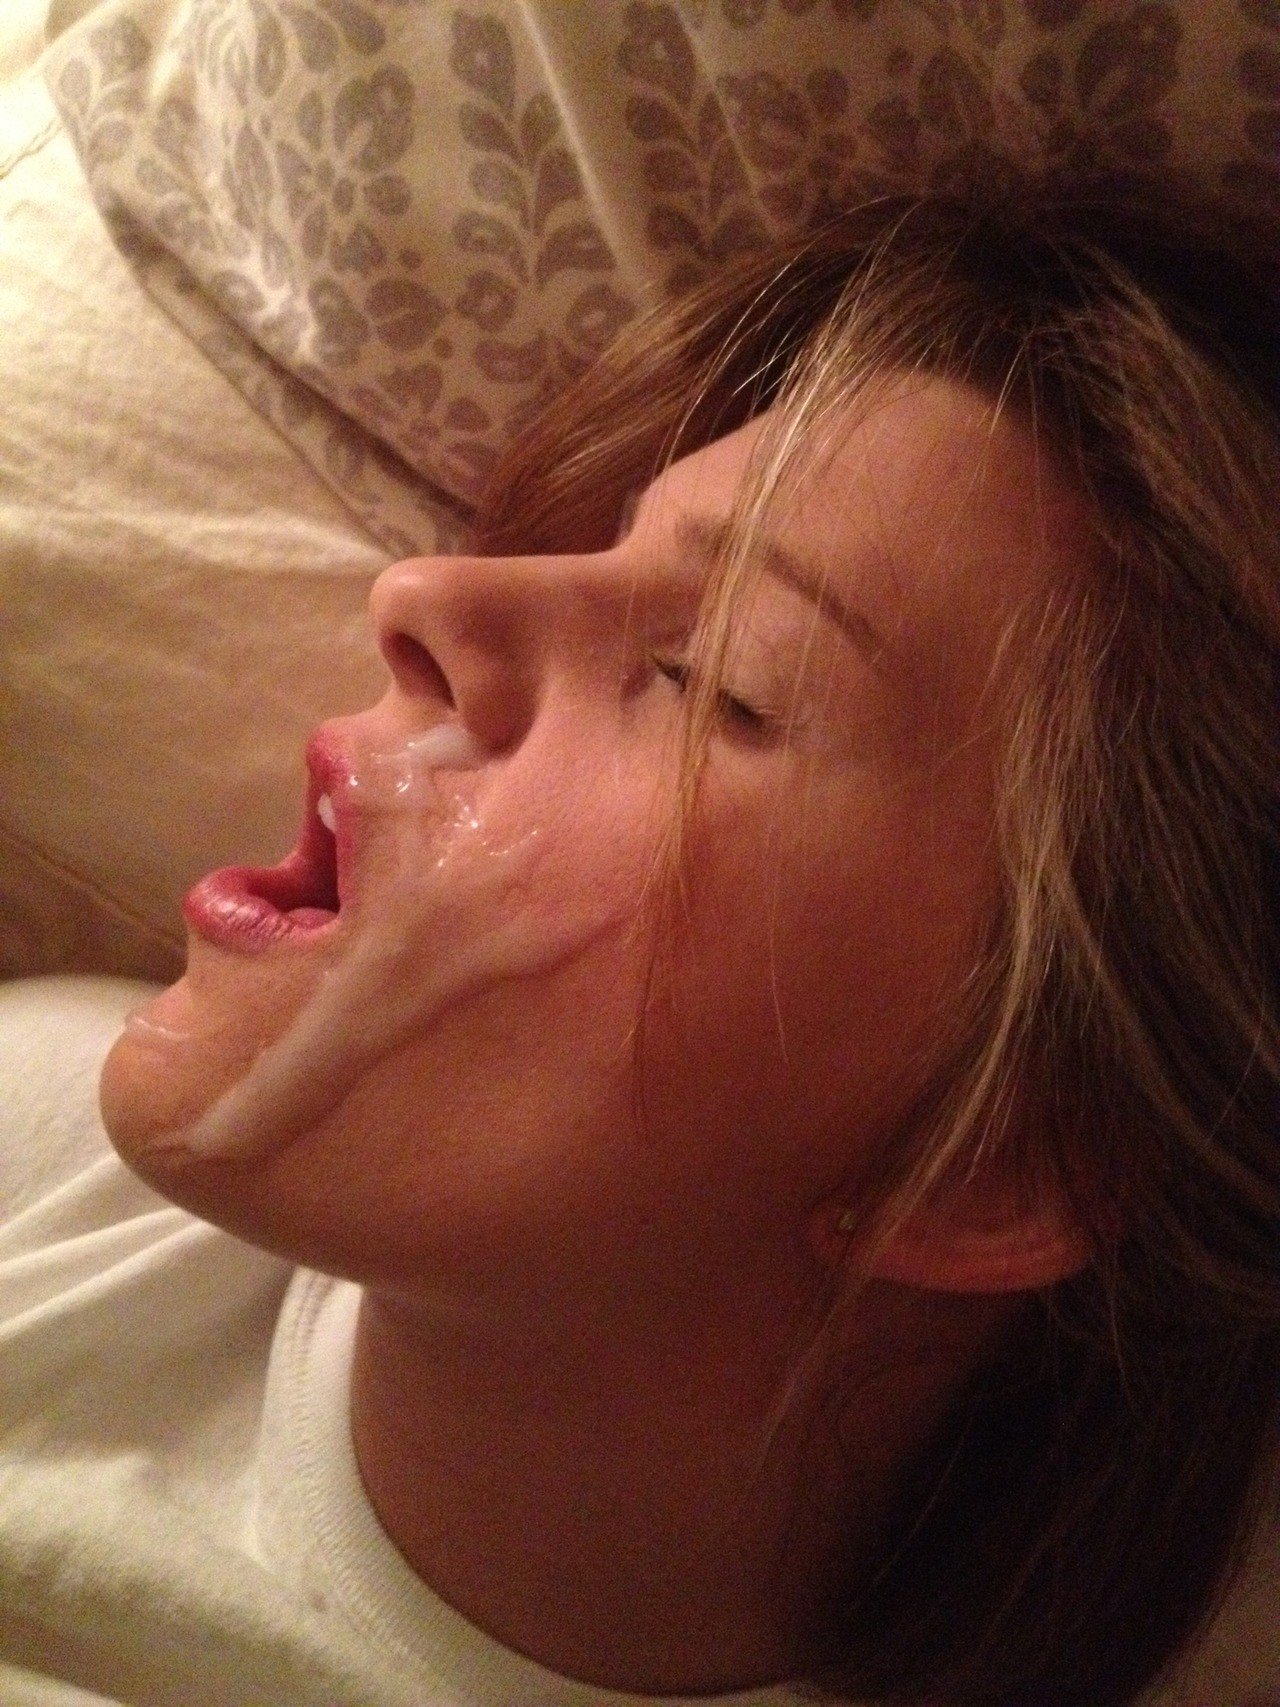 Why We Love Amateur Facial Compilations